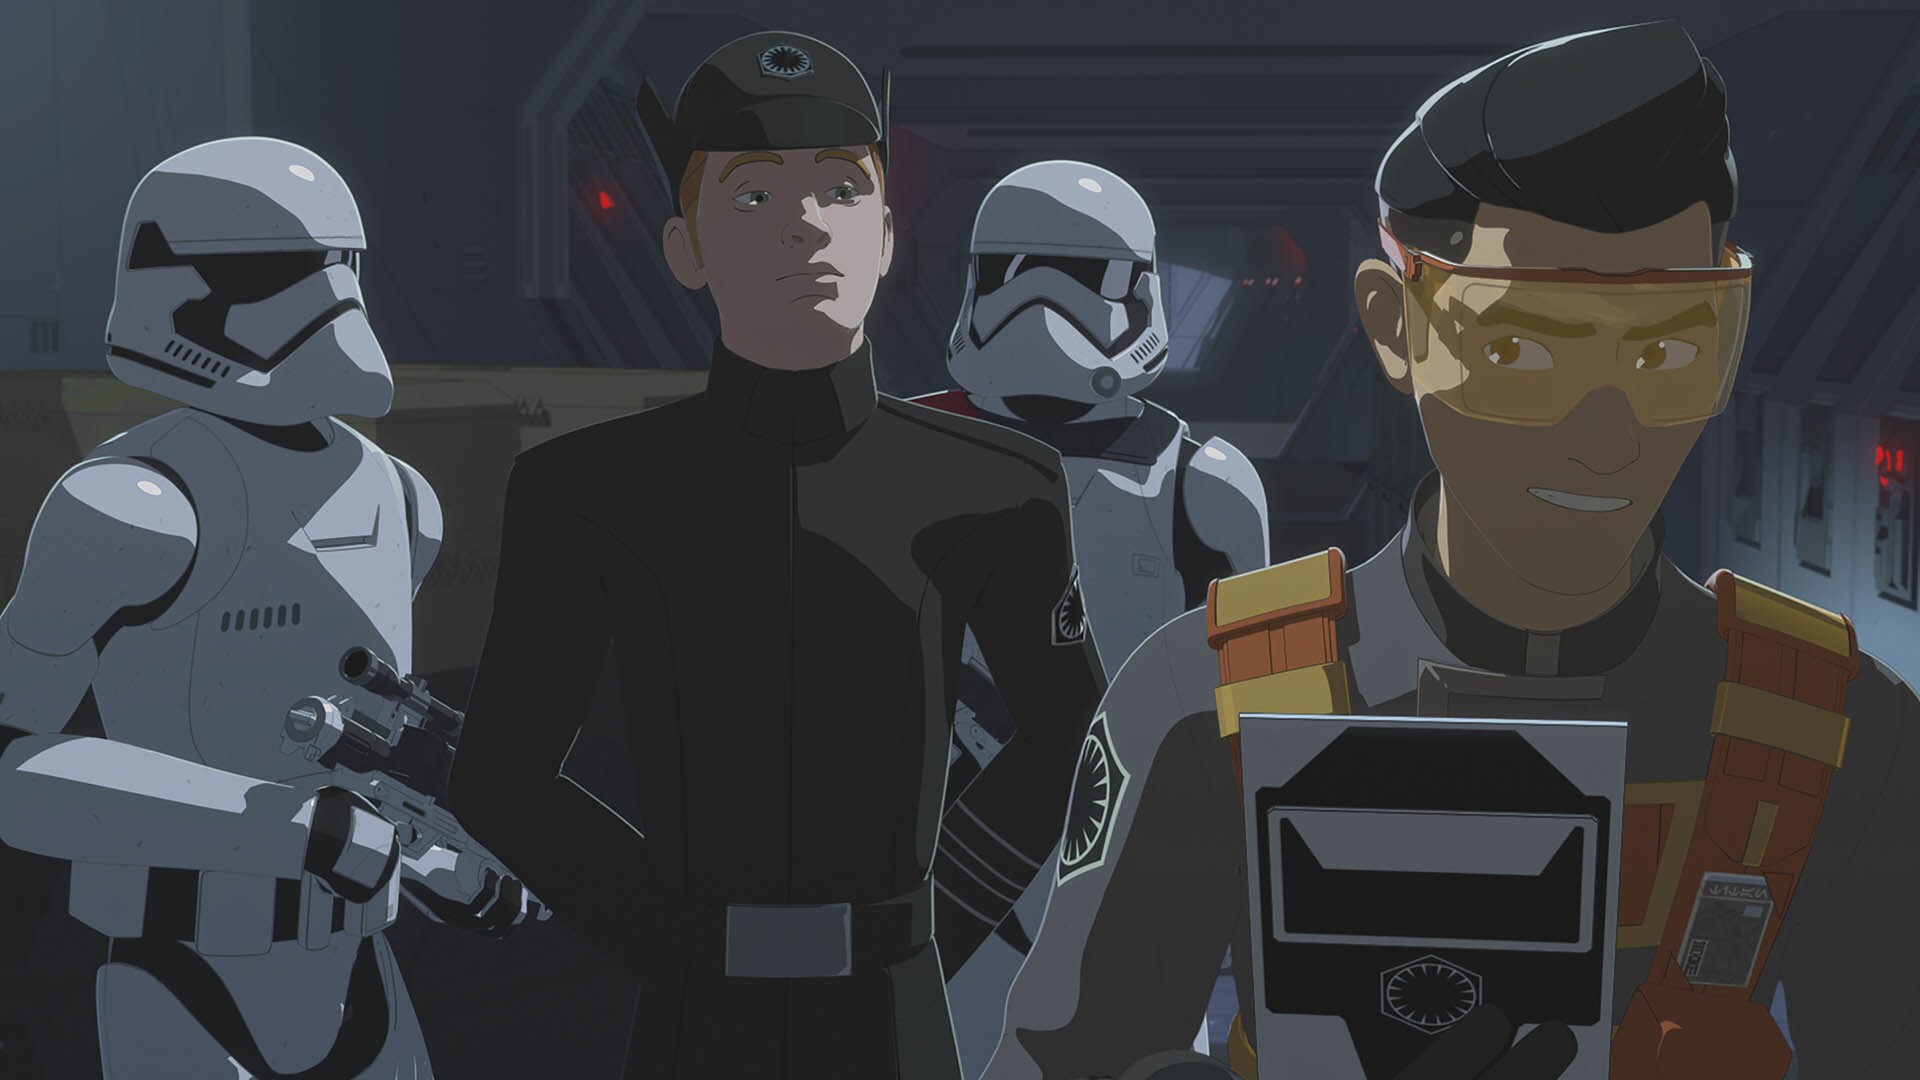 Kaz and Neeku make their way upstairs...but stormtroopers stop Kaz and order him to escort Genera...